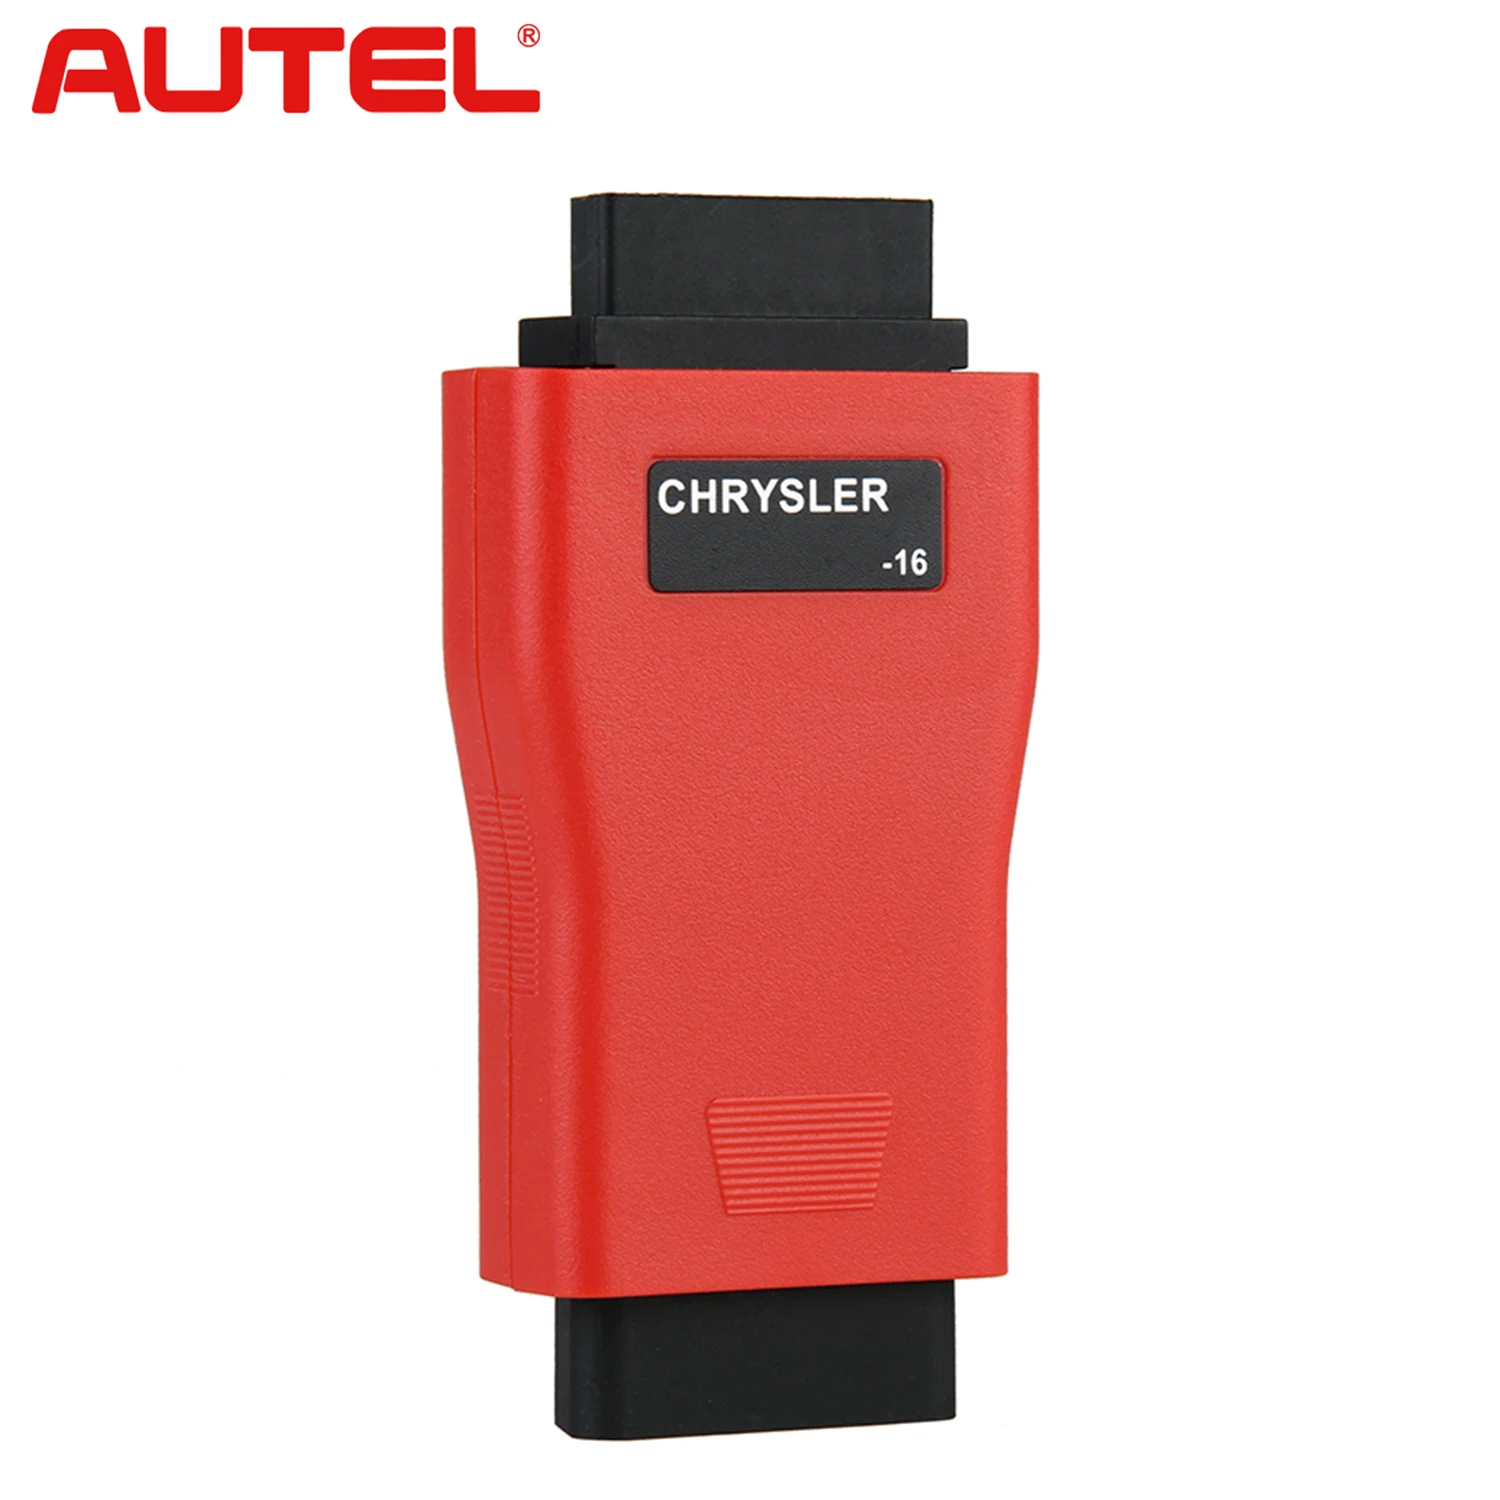 

Autel 16Pin Adapter For Chrysler Diagnostic Tool For Maxisys Pro MS908p,Maxisys Elite,MS906BT,DS808K,MK908 Connector For MK908P